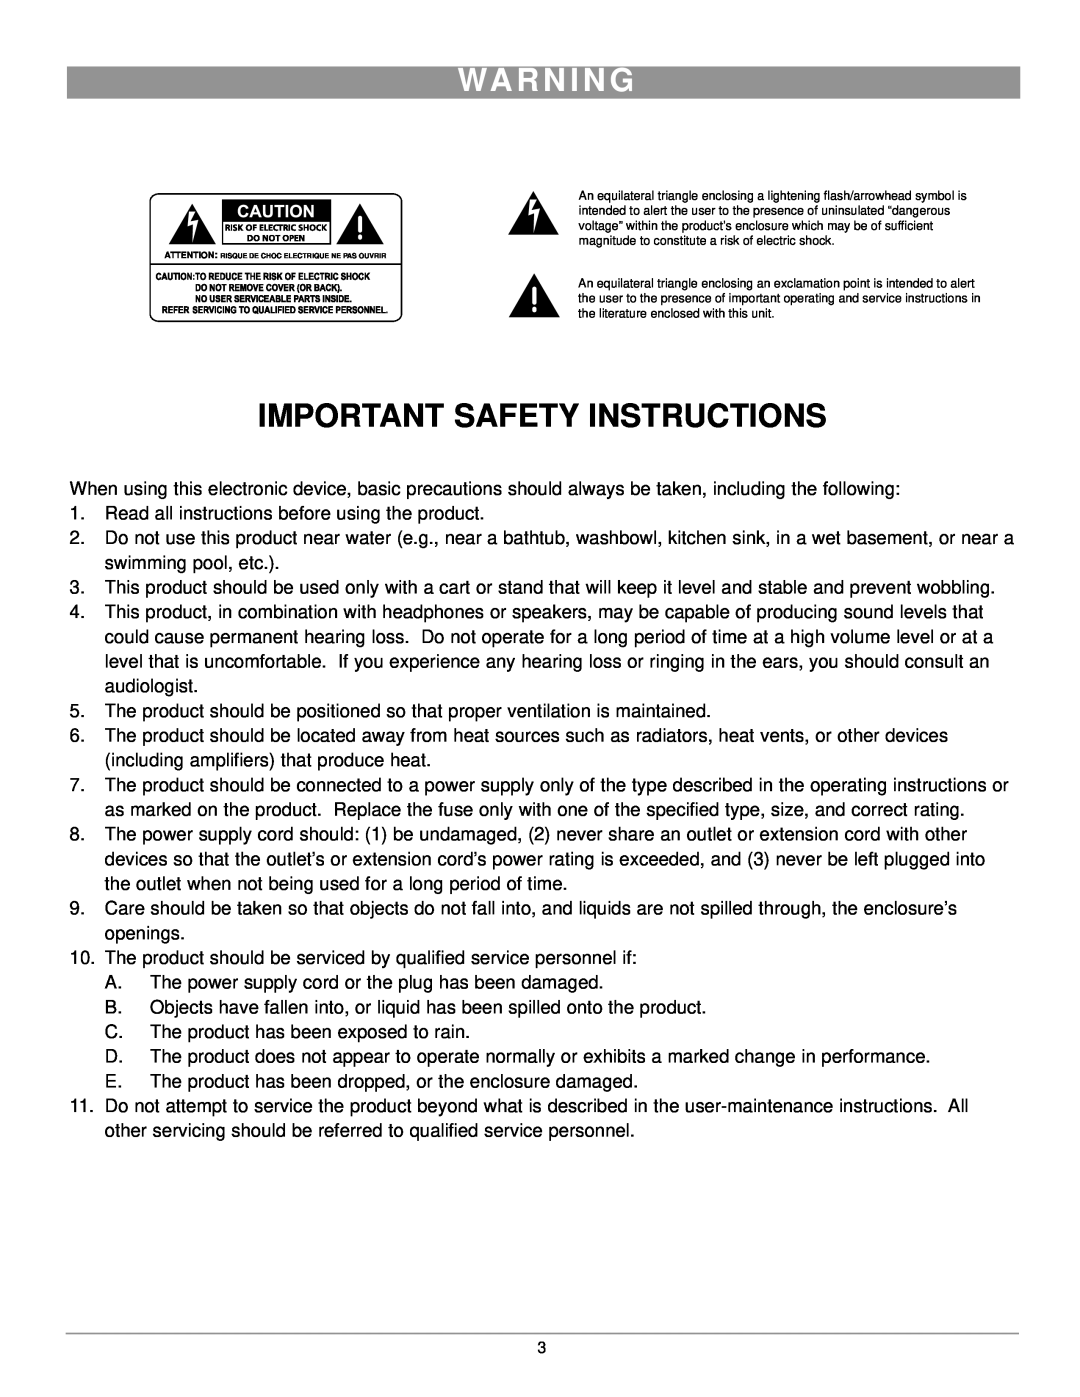 Nady Systems SPM-835 owner manual Wa R N I N G, Important Safety Instructions 